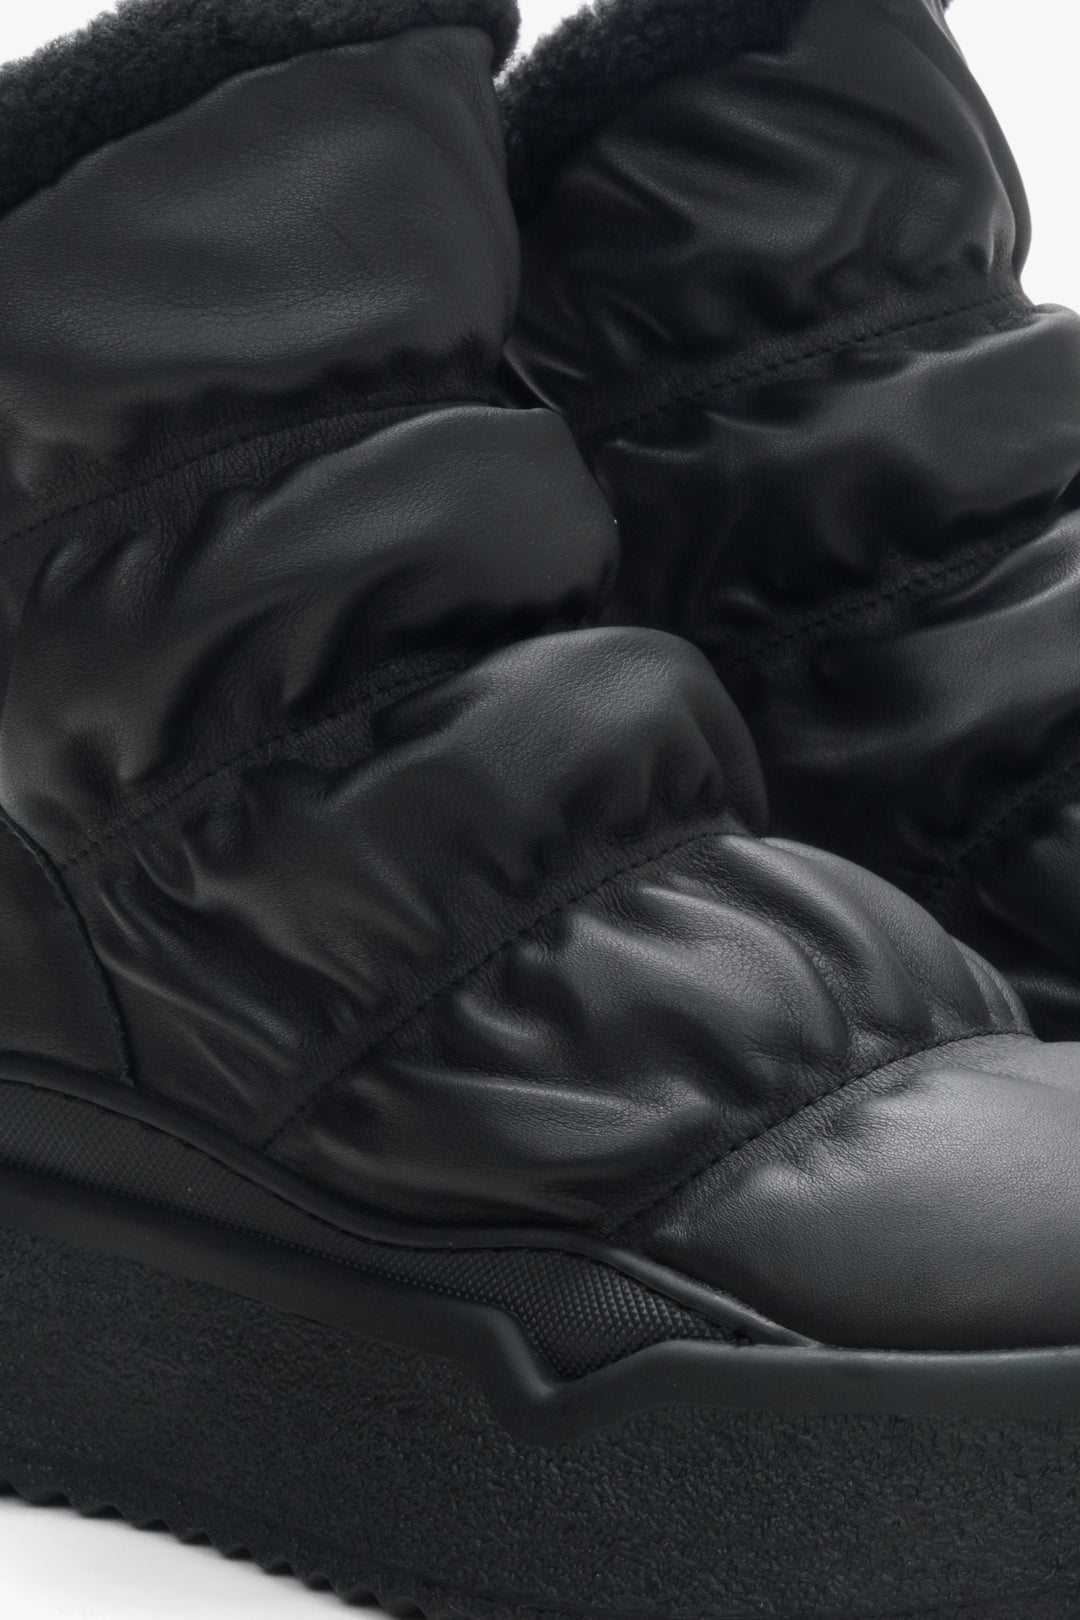 Women's snow boots in black Estro - a close-up on details.